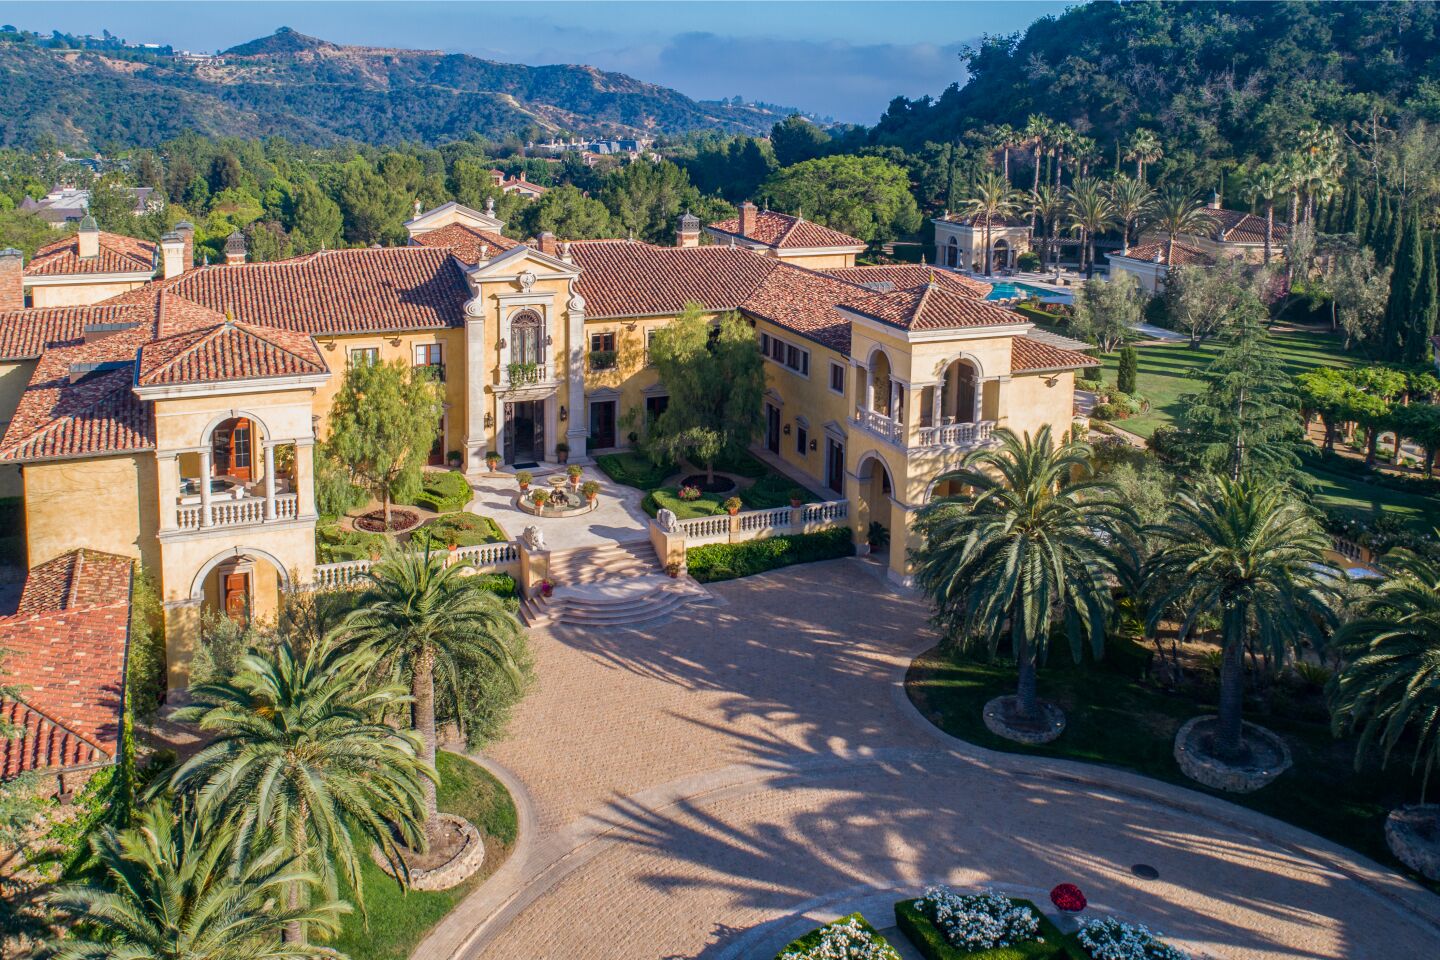 The Italian-inspired mansion.